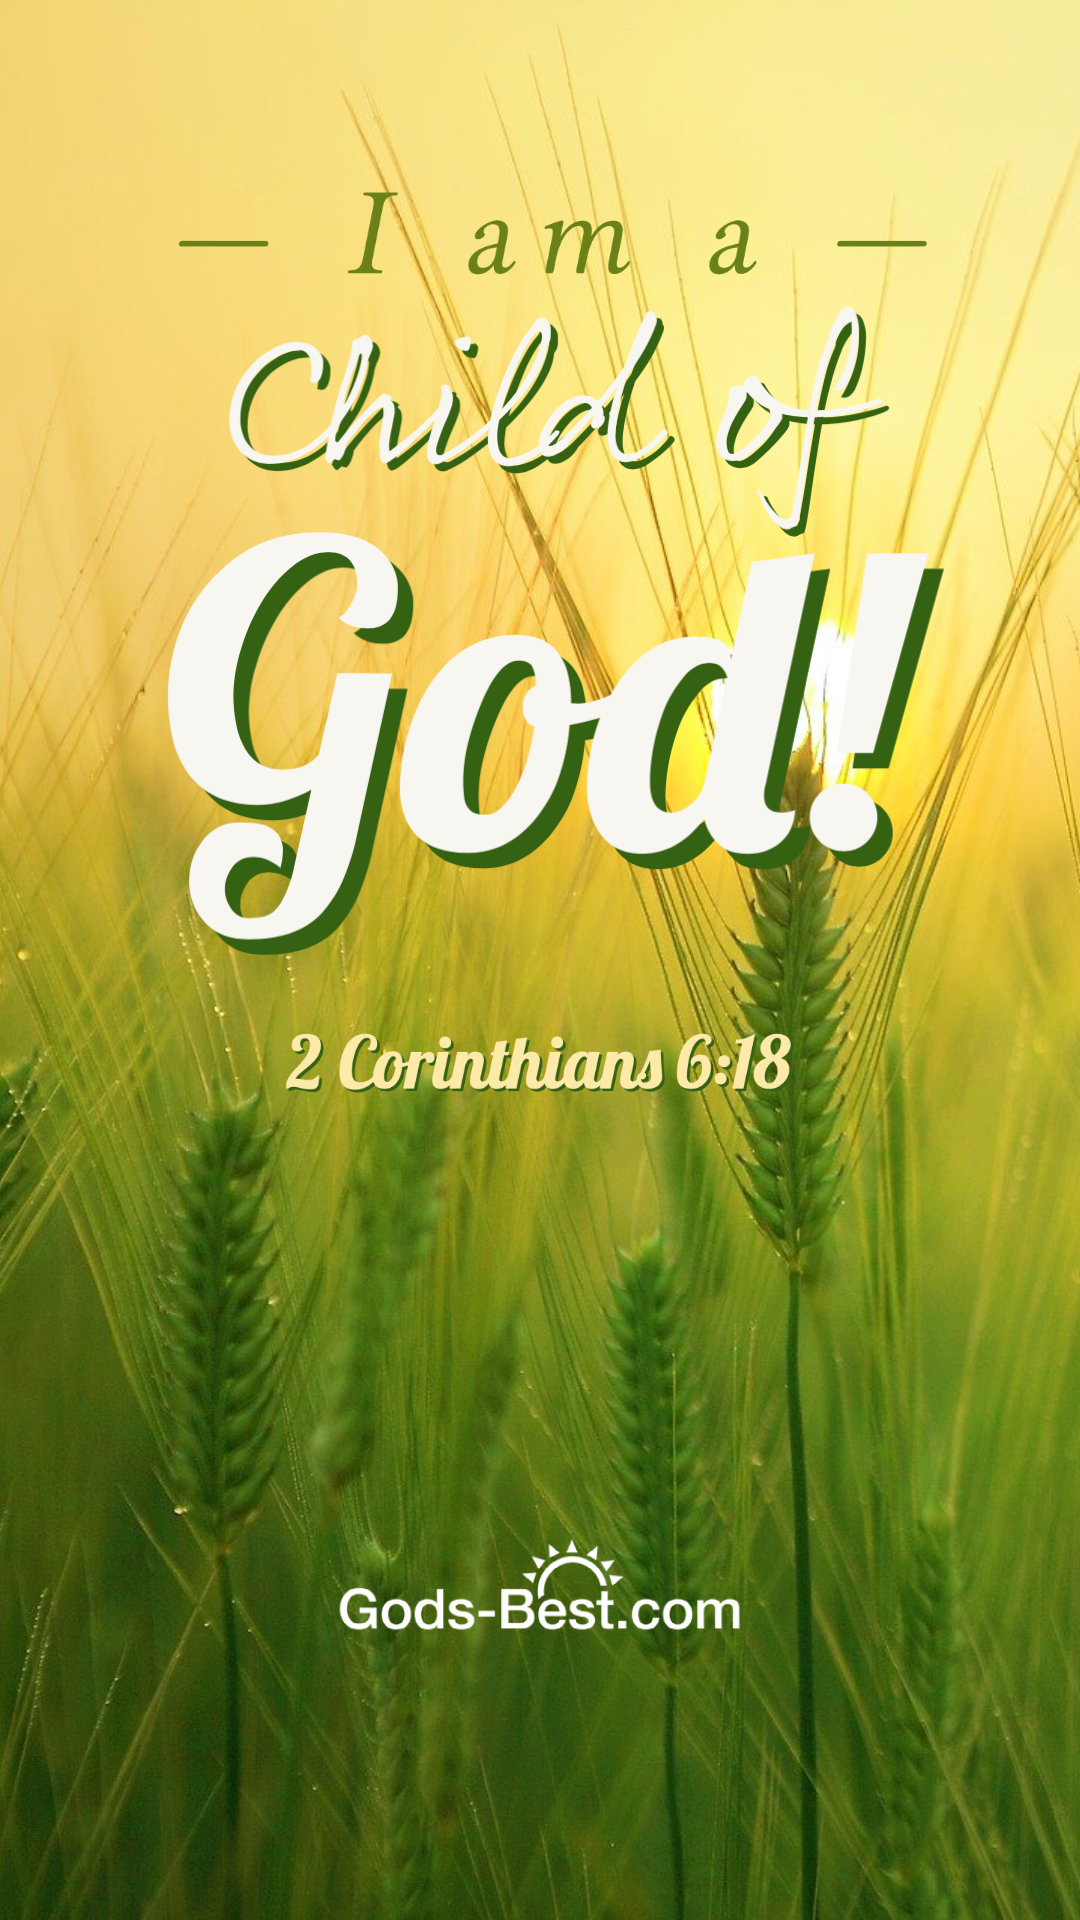 Child of God - Free Phone and Desktop Wallpapers - God's Best for Your Life!